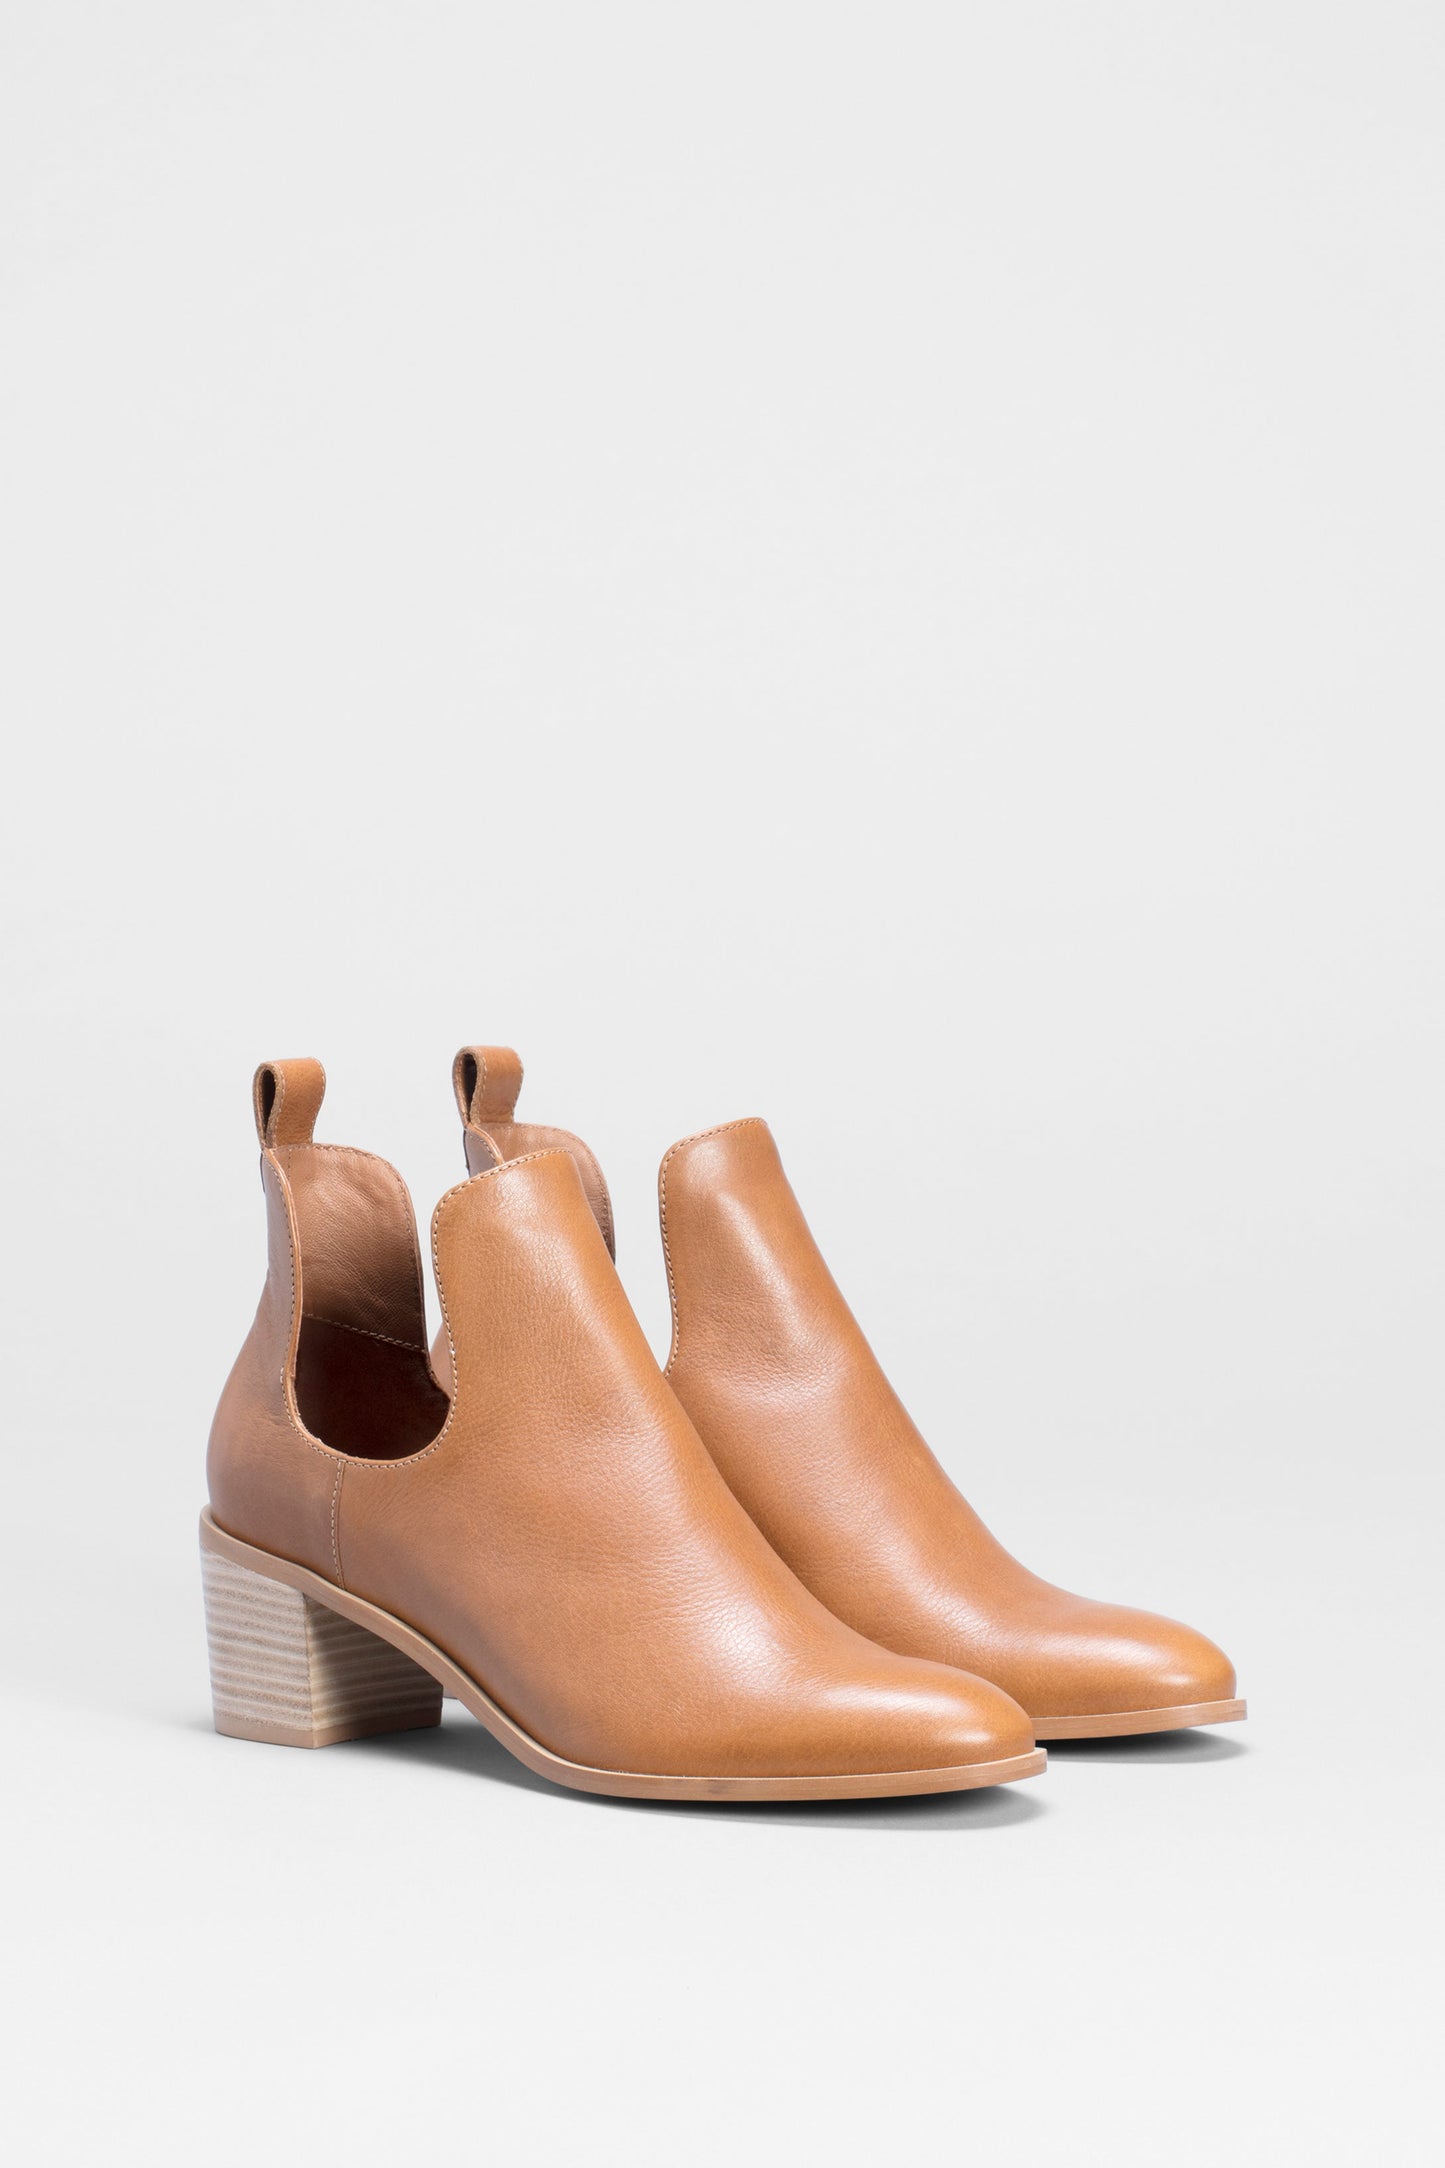 Valla Cut Out Heeled Leather Boot Angled Front | TAN